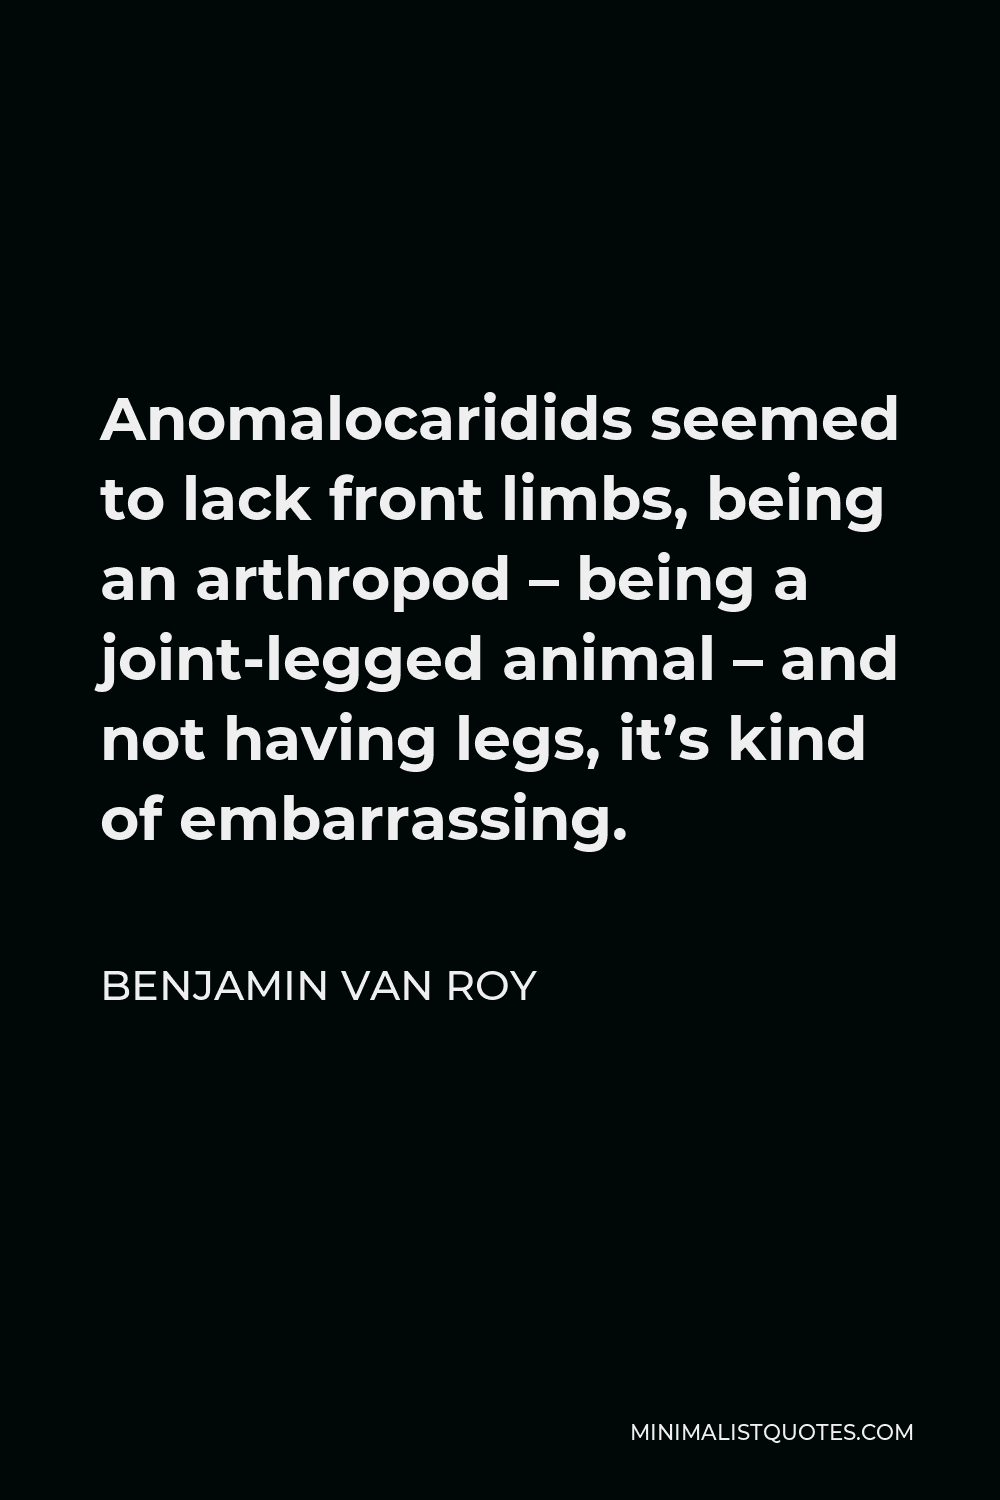 Benjamin Van Roy Quote - Anomalocaridids seemed to lack front limbs, being an arthropod – being a joint-legged animal – and not having legs, it’s kind of embarrassing.